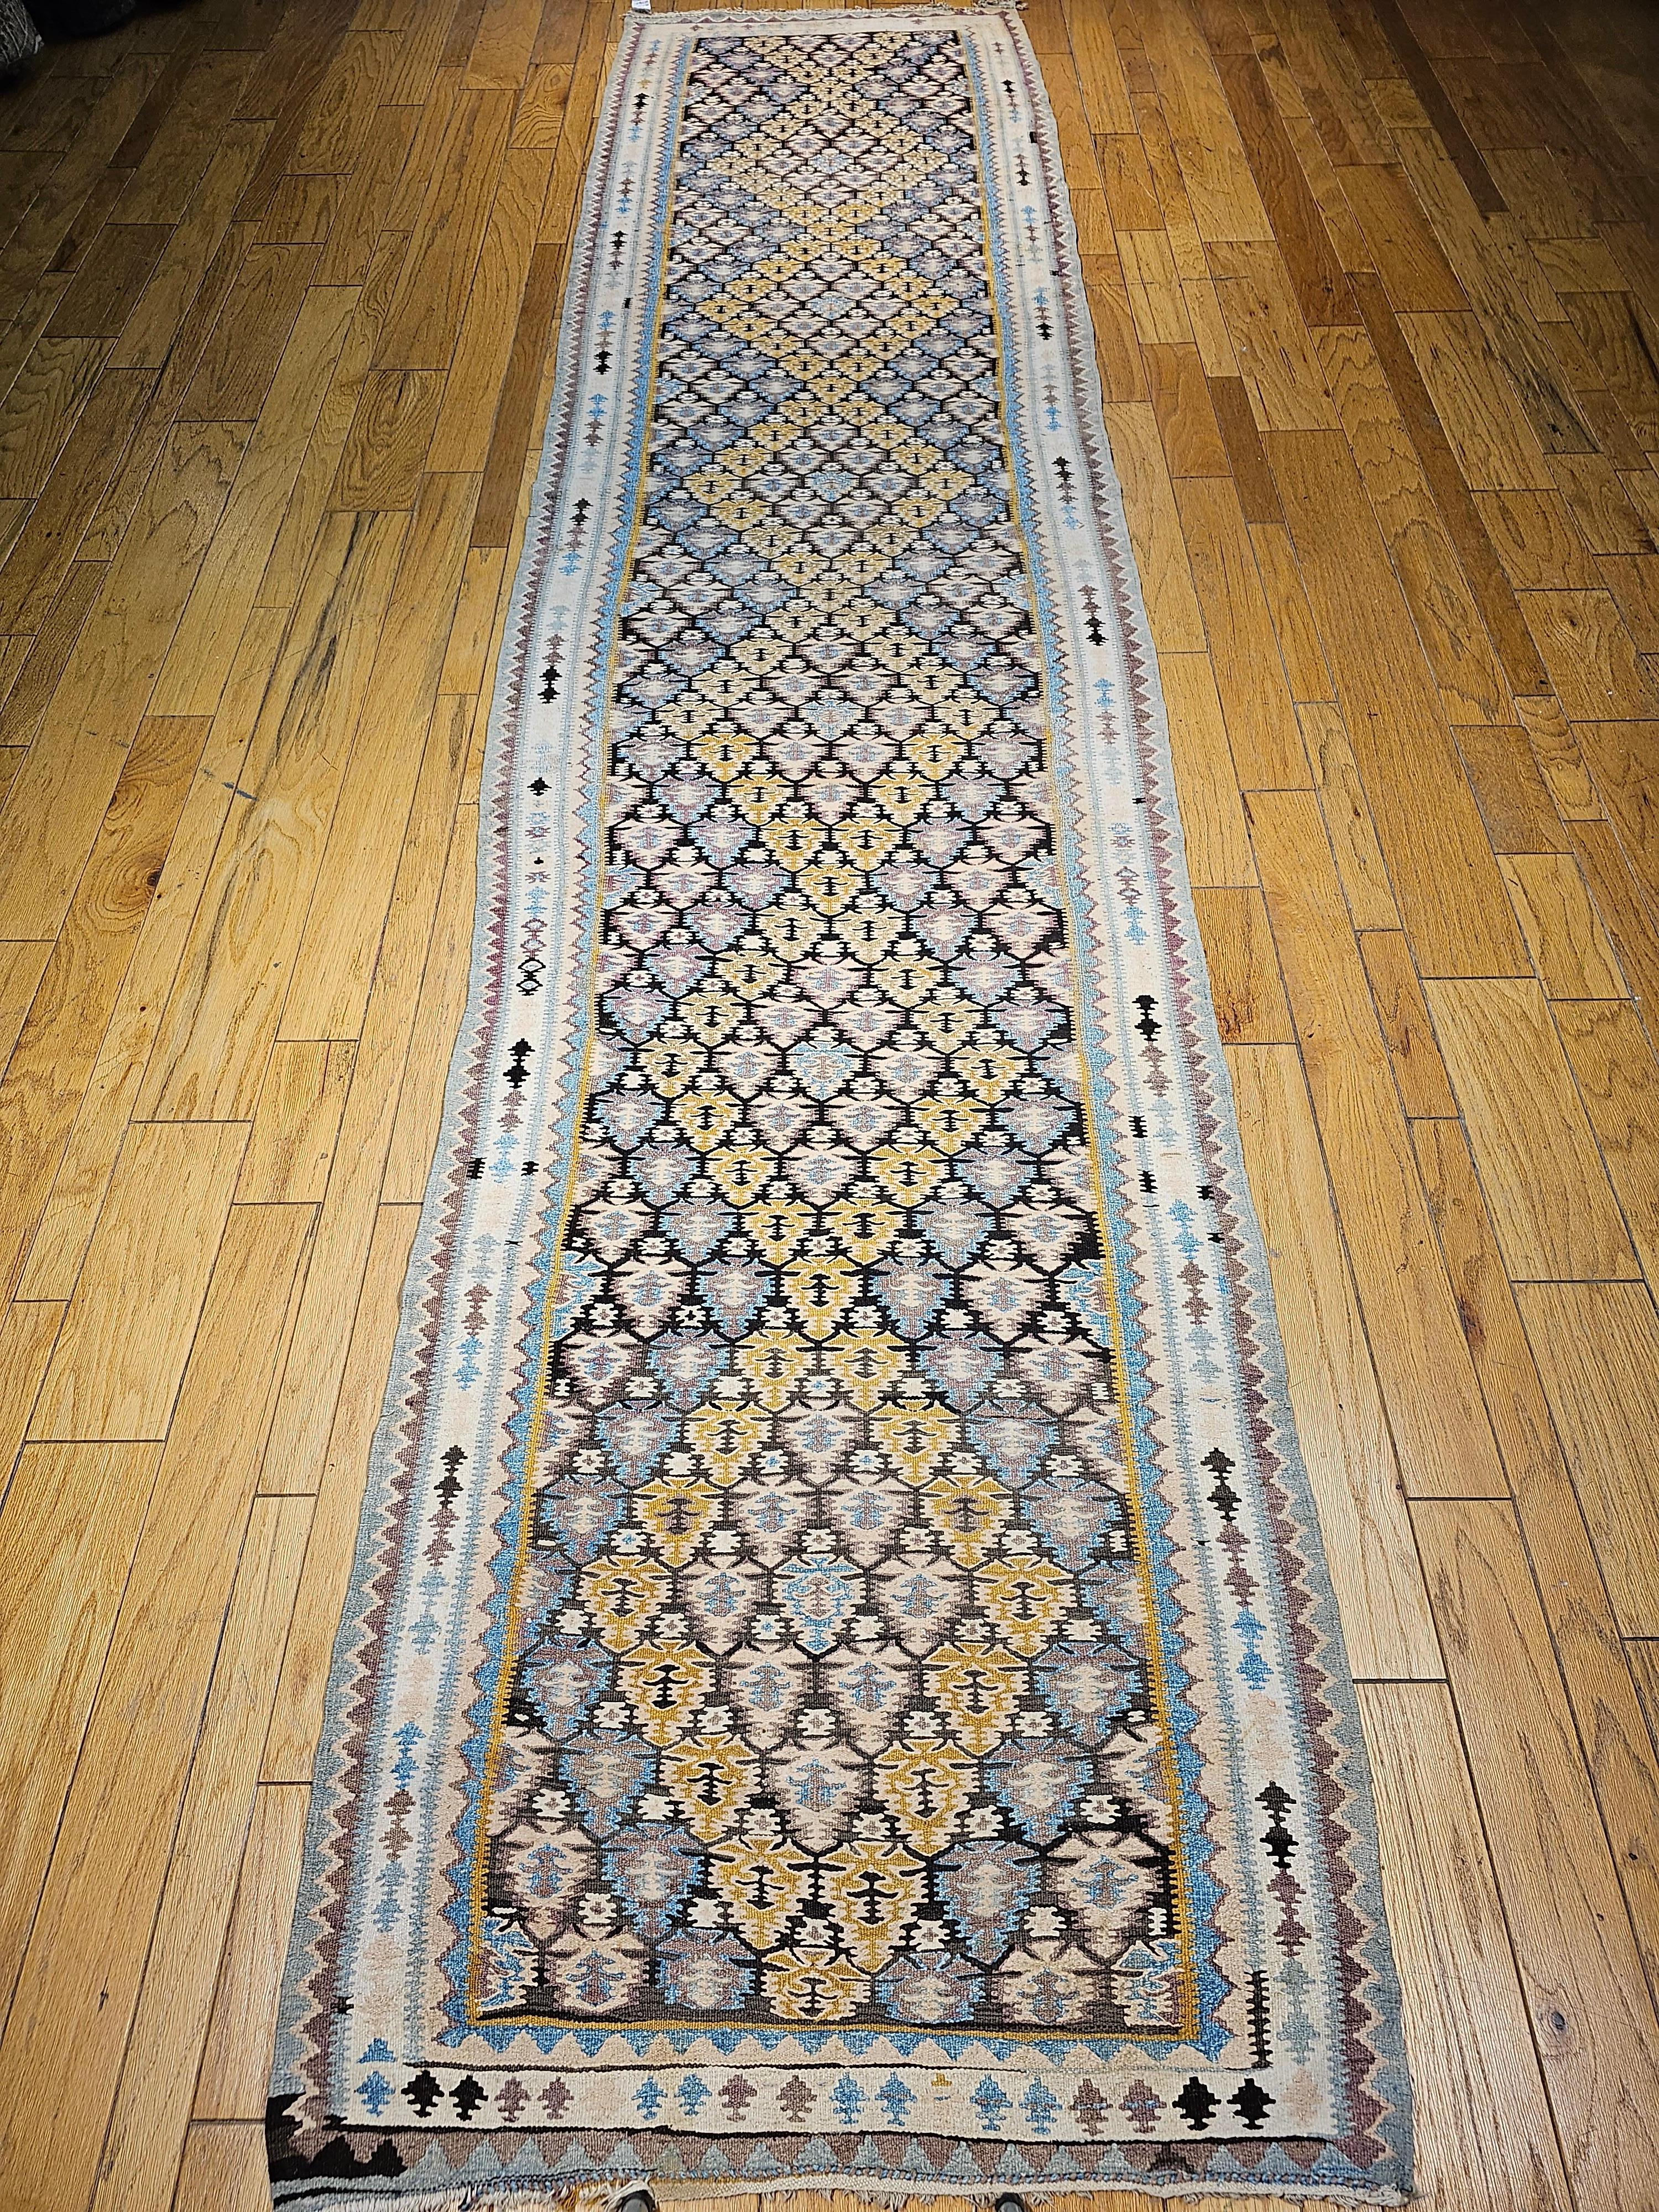 Vintage Persian Kilim (flat woven) long runner has a brilliant geometric design and wonderful colors.   Beautiful Persian kilim runner is from the city of Qazvin in central Persia which was a major stop on the ancient Silk Road.   The allover design